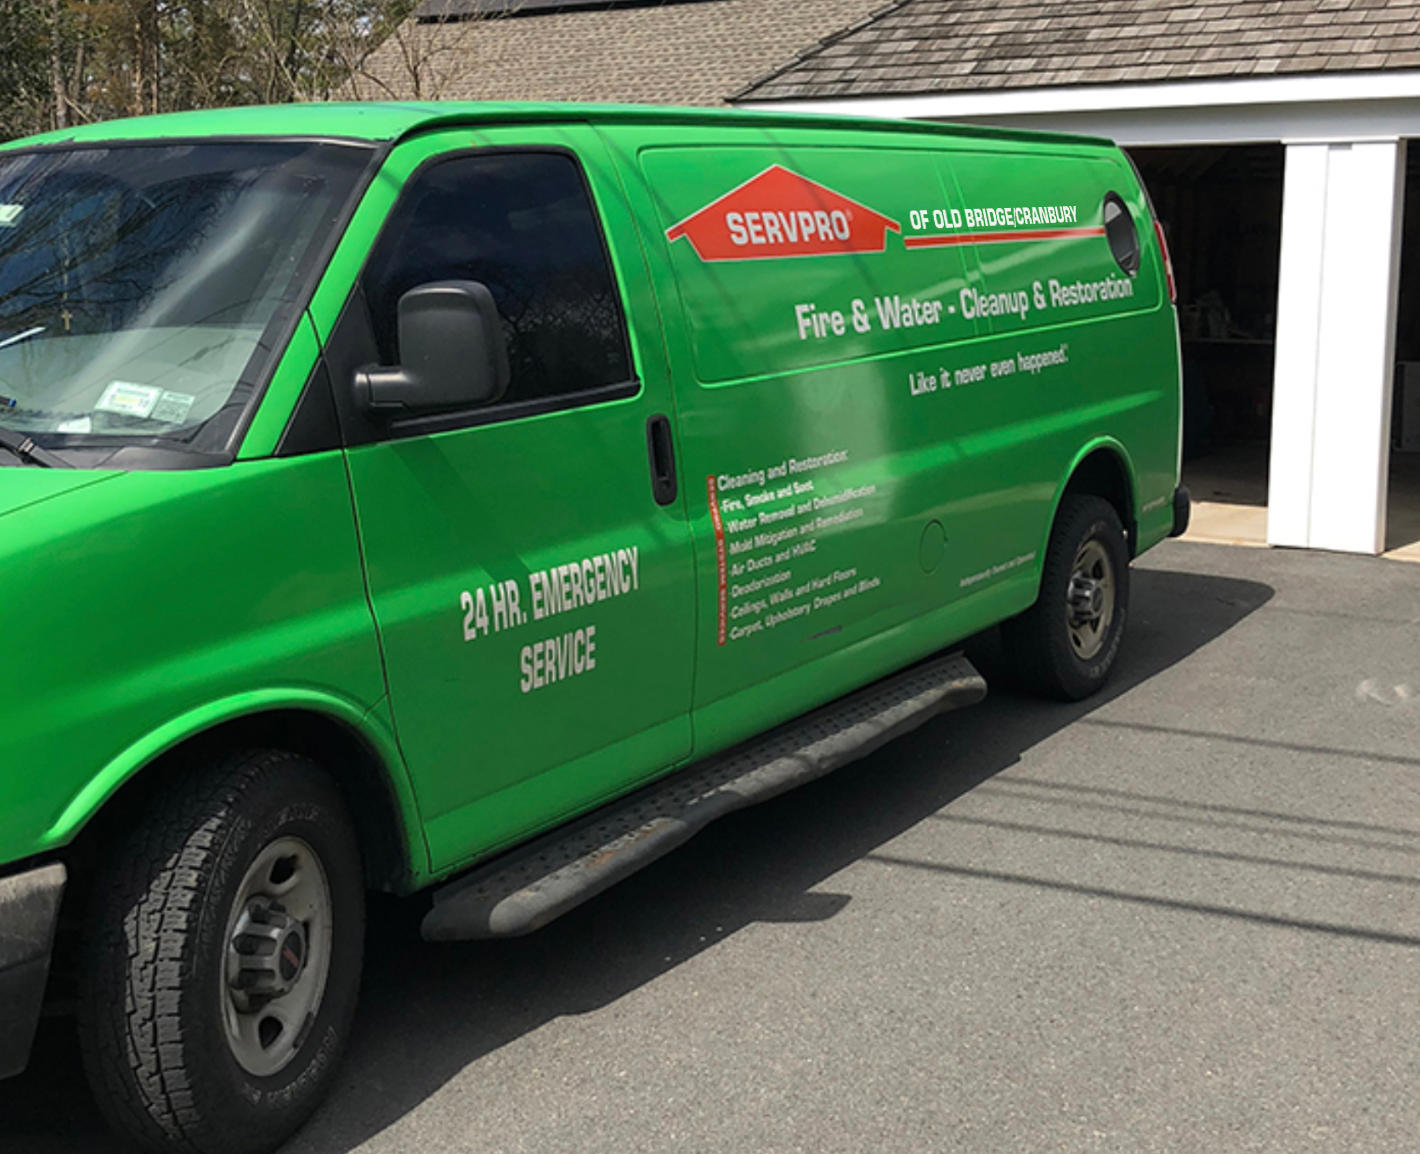 SERVPRO service van stocked with equipment and supplies to help local residents and businesses with professional property damage restoration services